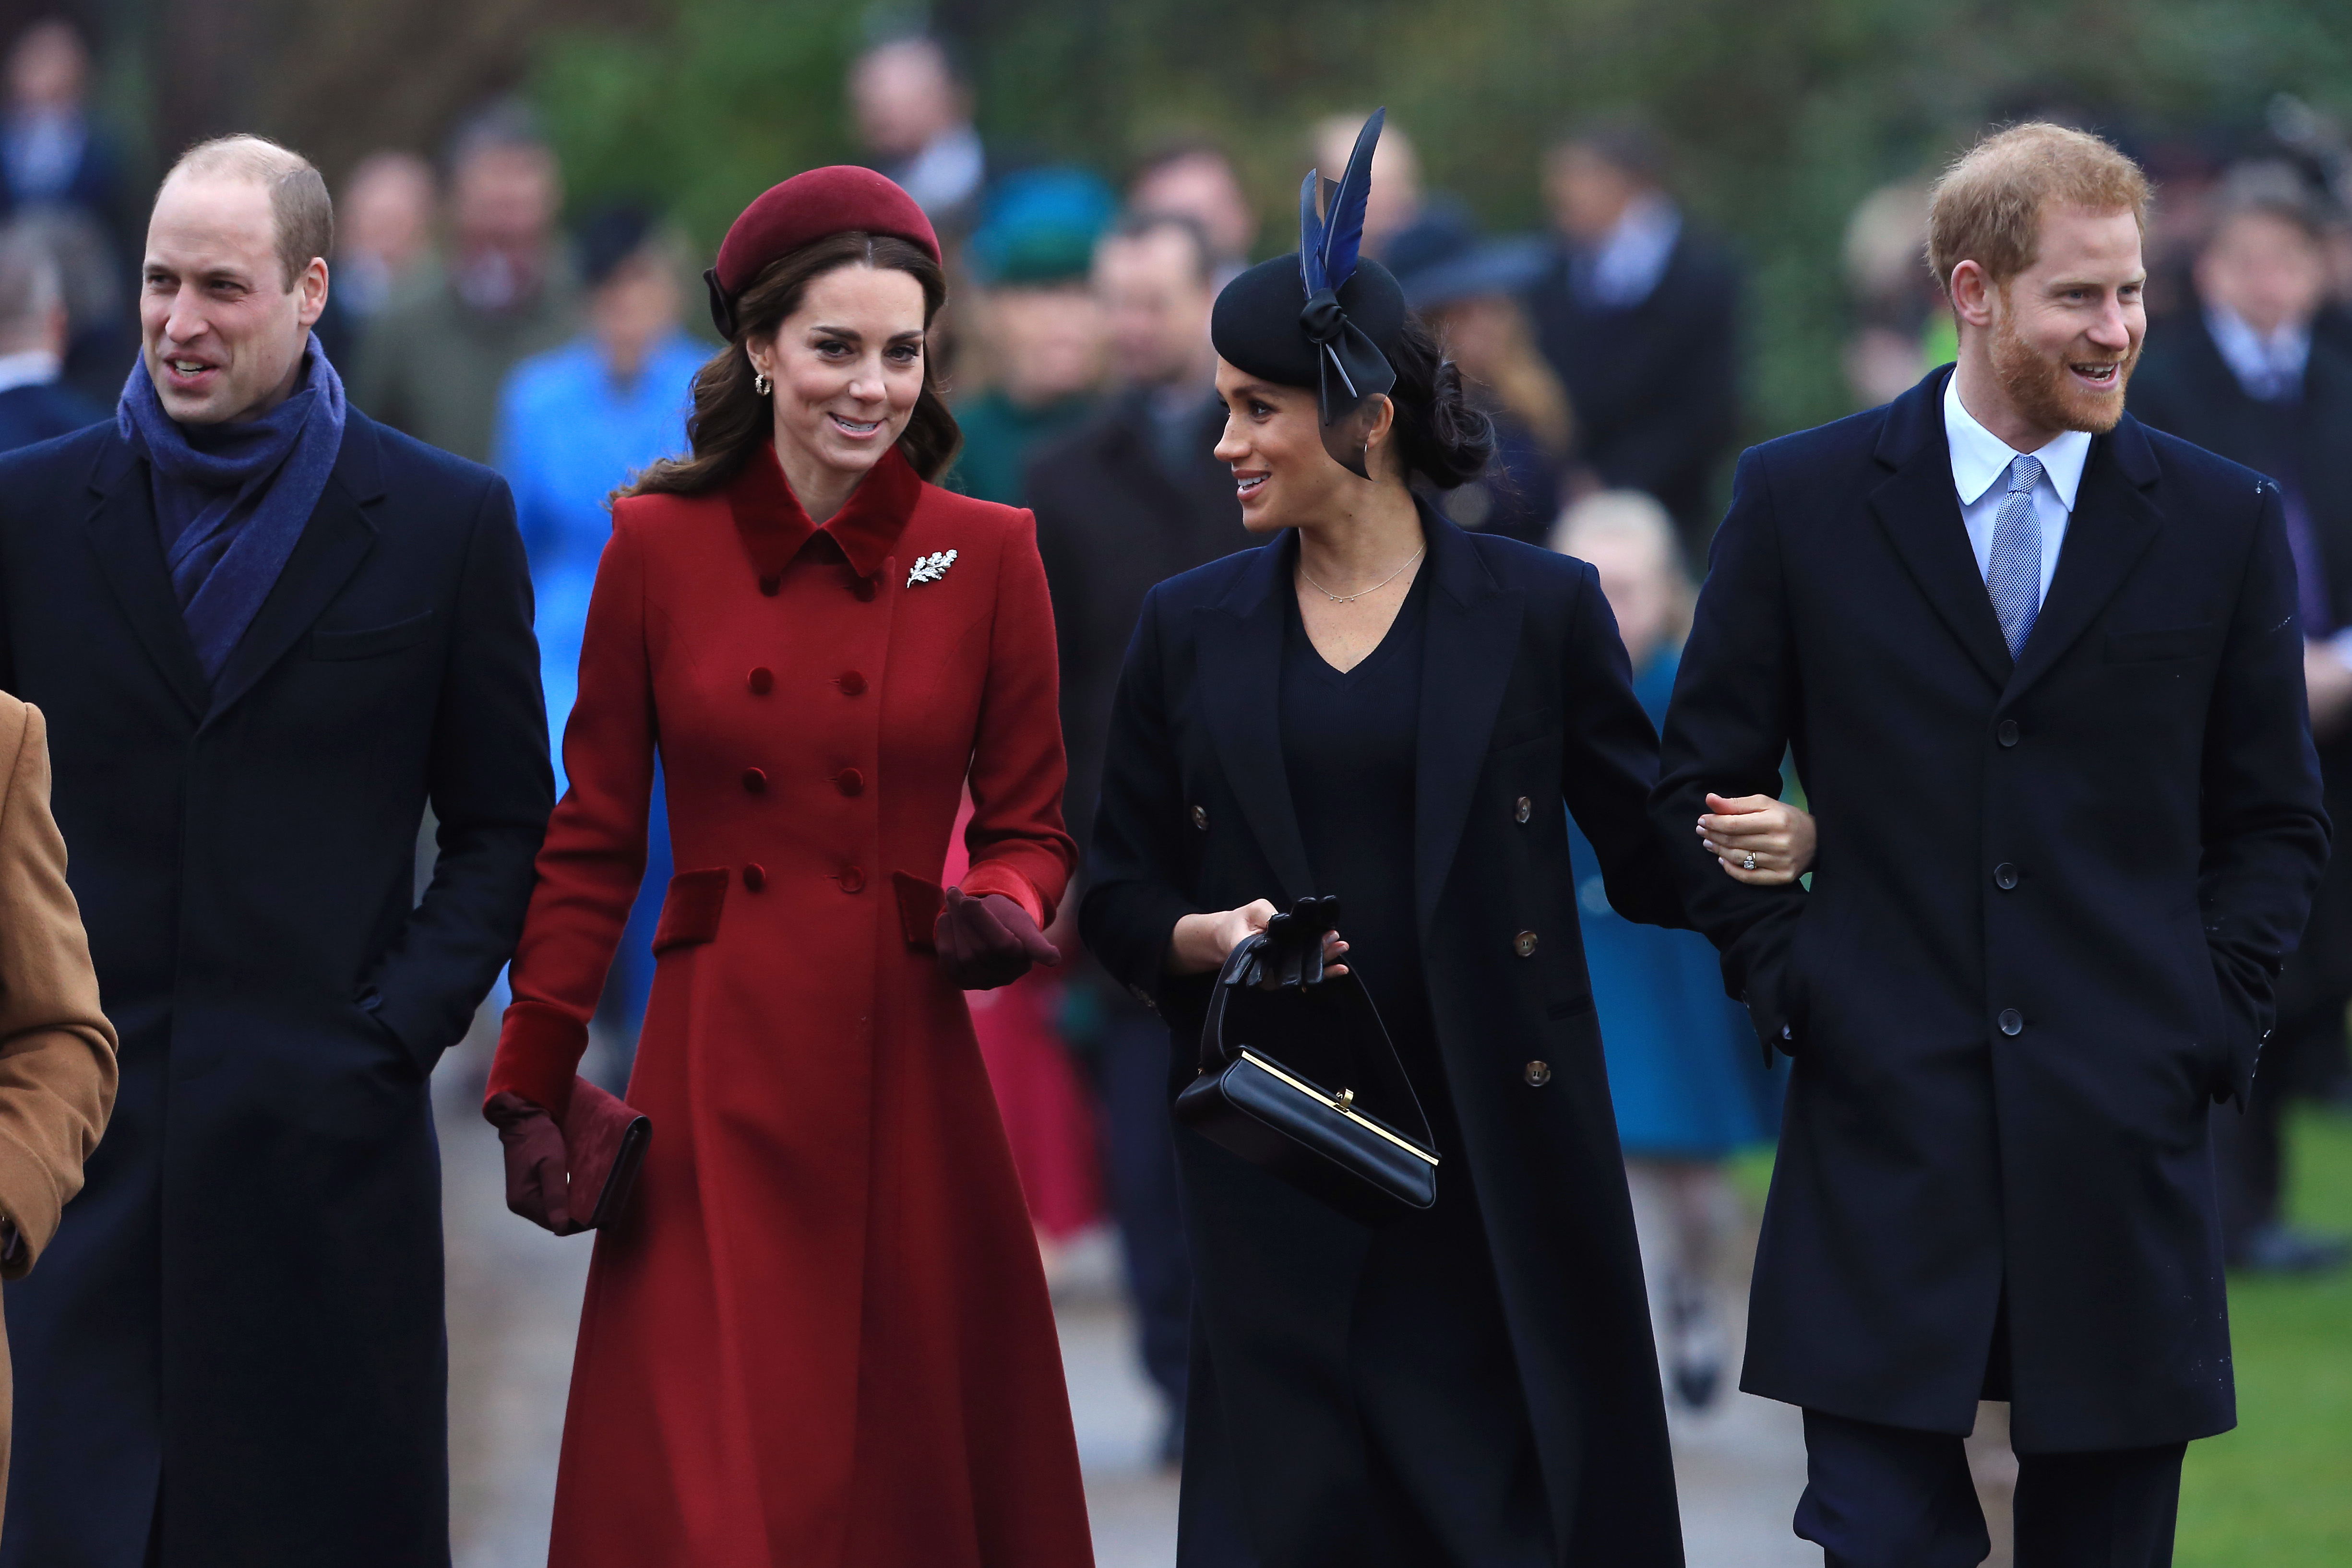 Prince William, Princess Catherine, Meghan Markle, and Prince Harry at the Christmas Day Church service at Church of St Mary Magdalene on the Sandringham estate on December 25, 2018 in King's Lynn, England | Source: Getty Images